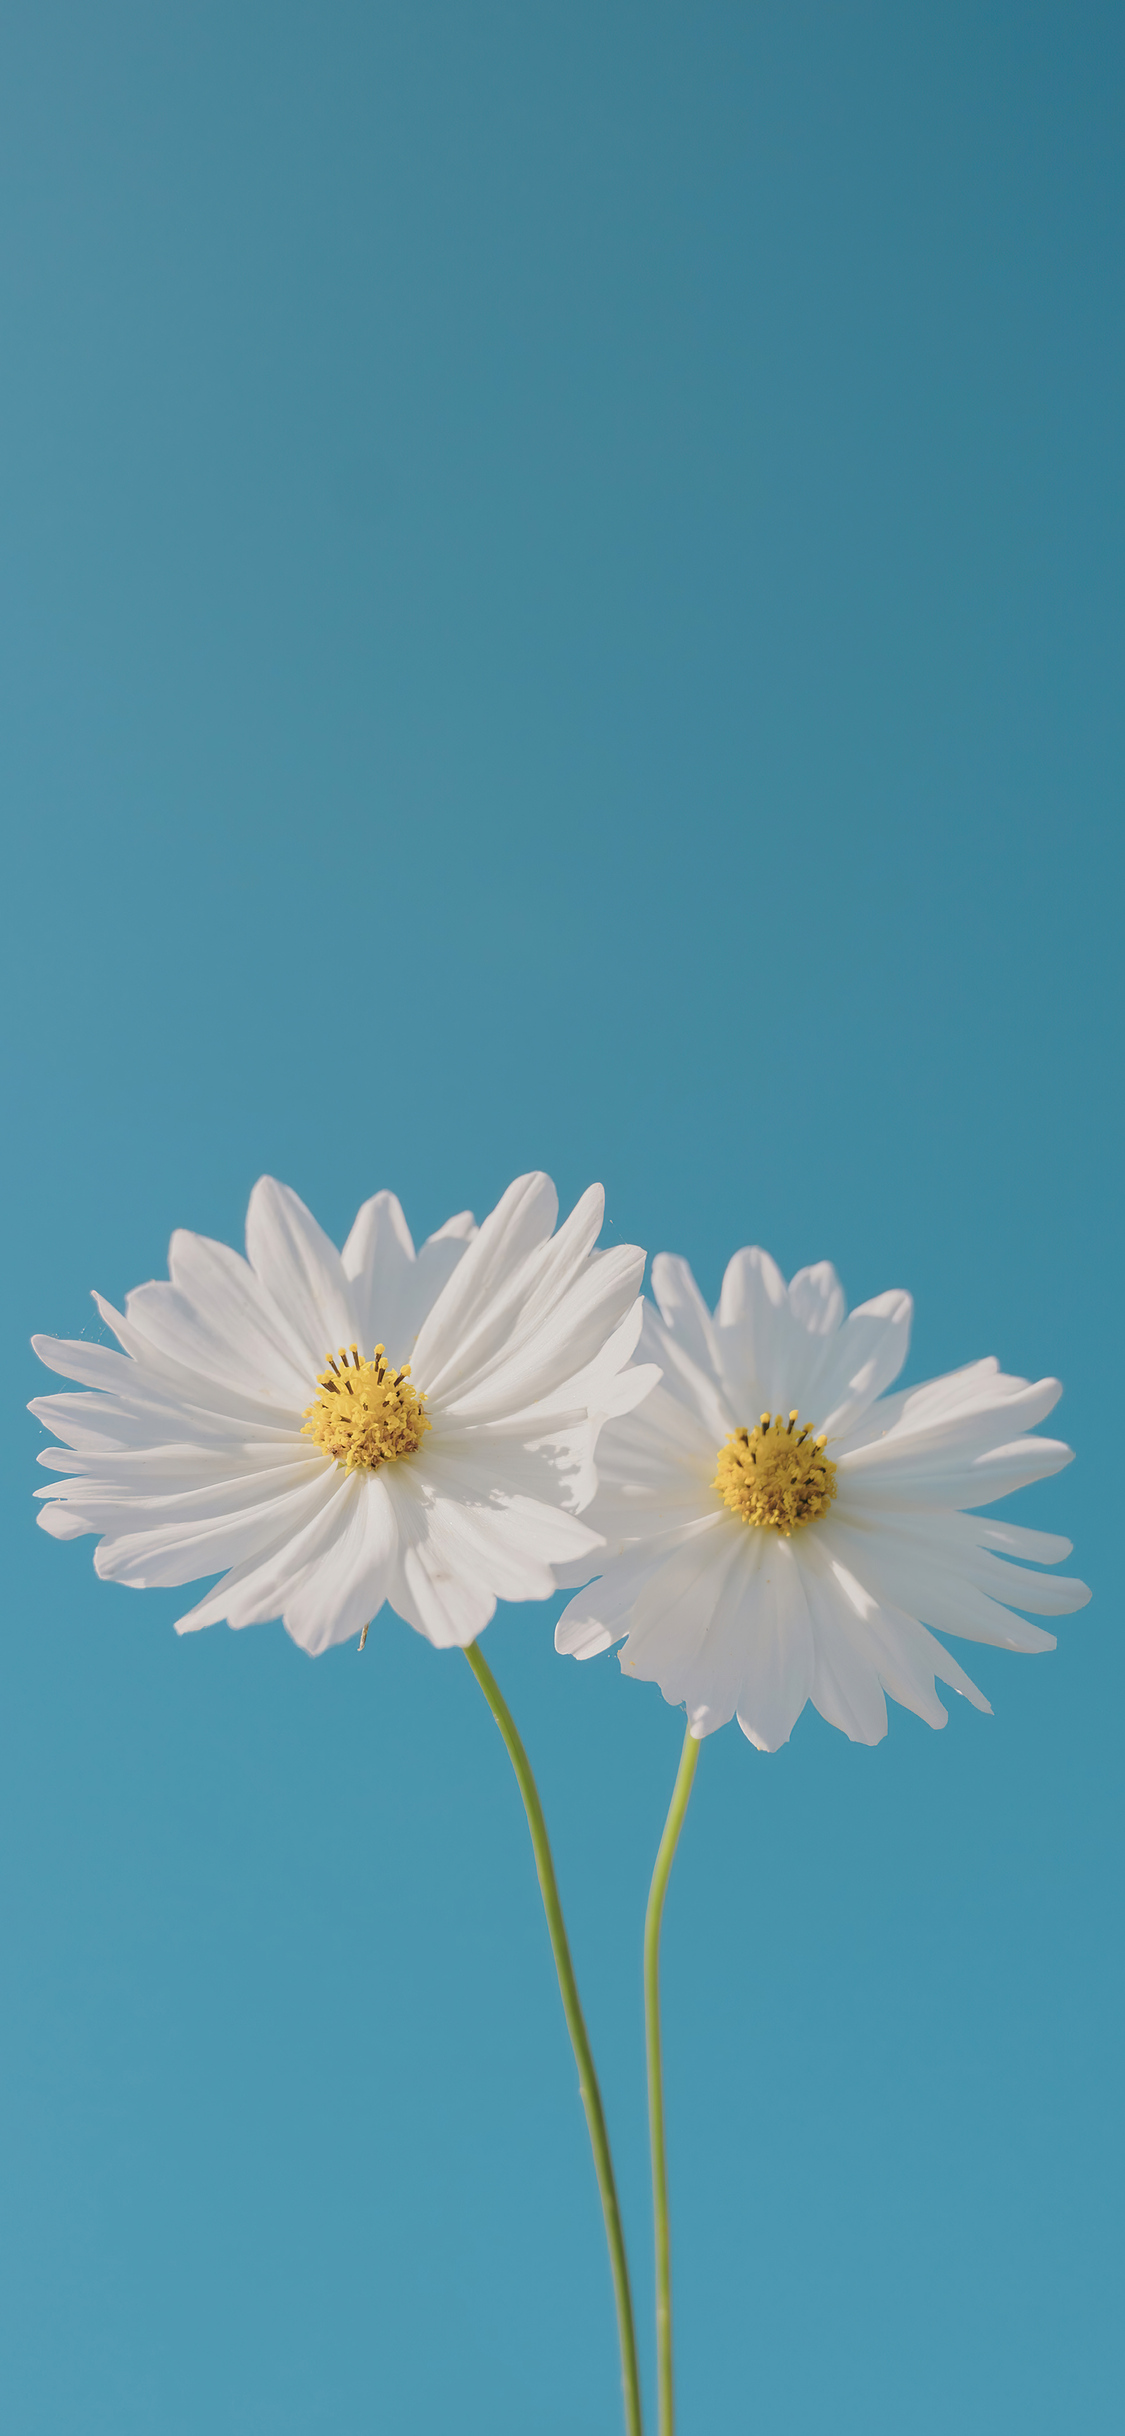 1125x2436 Blue Sky And Flower Iphone Xs